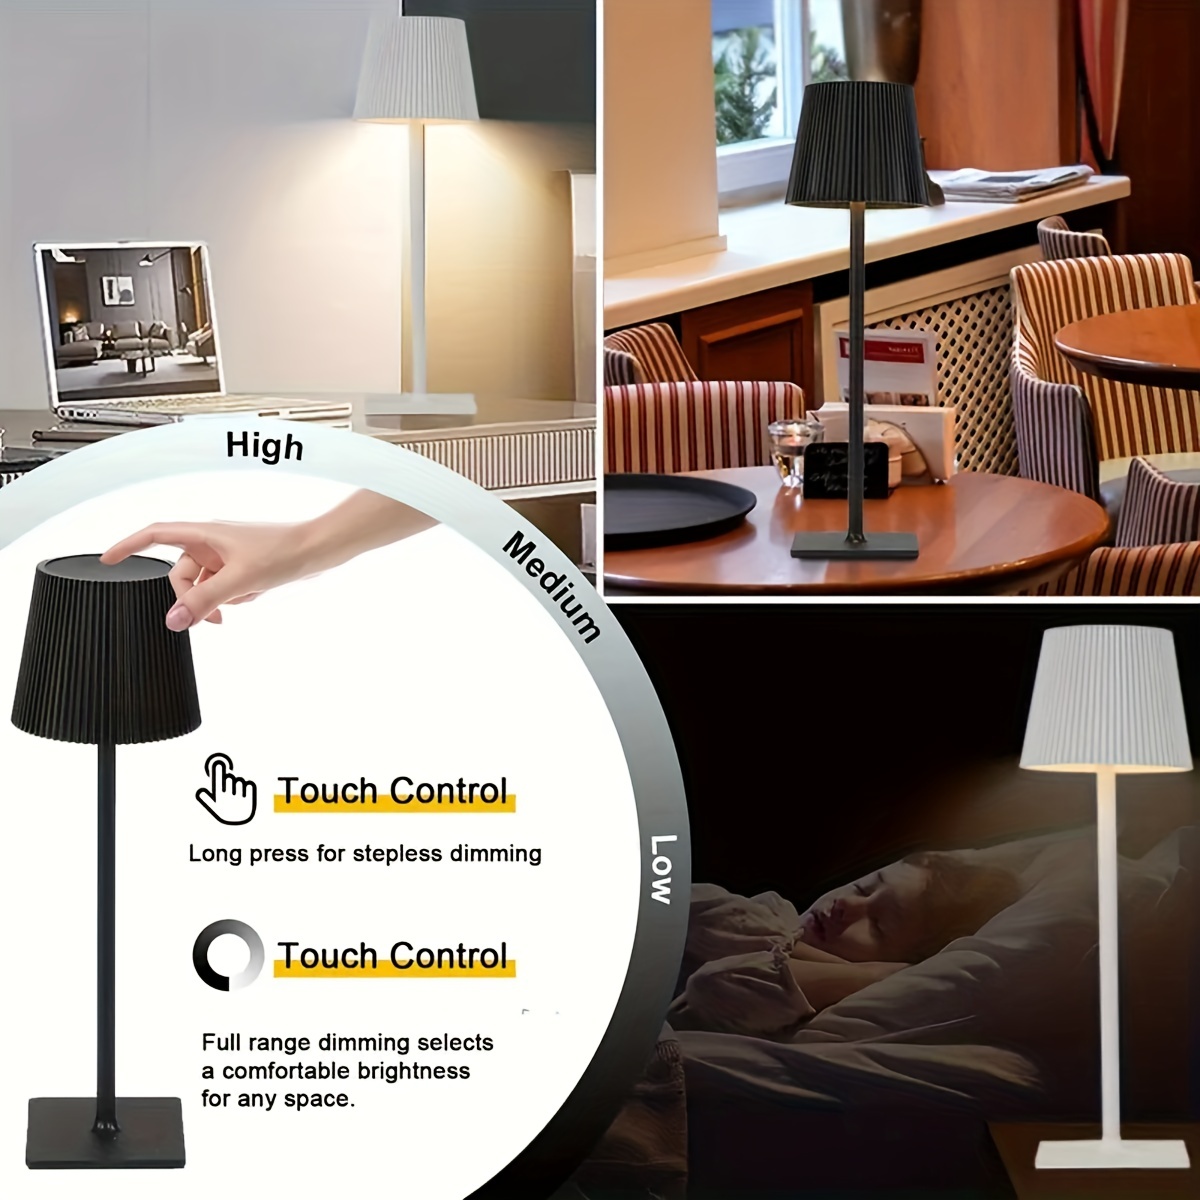 Led Cordless Table Lamp, Battery Powered Lamp,usb Rechargeable